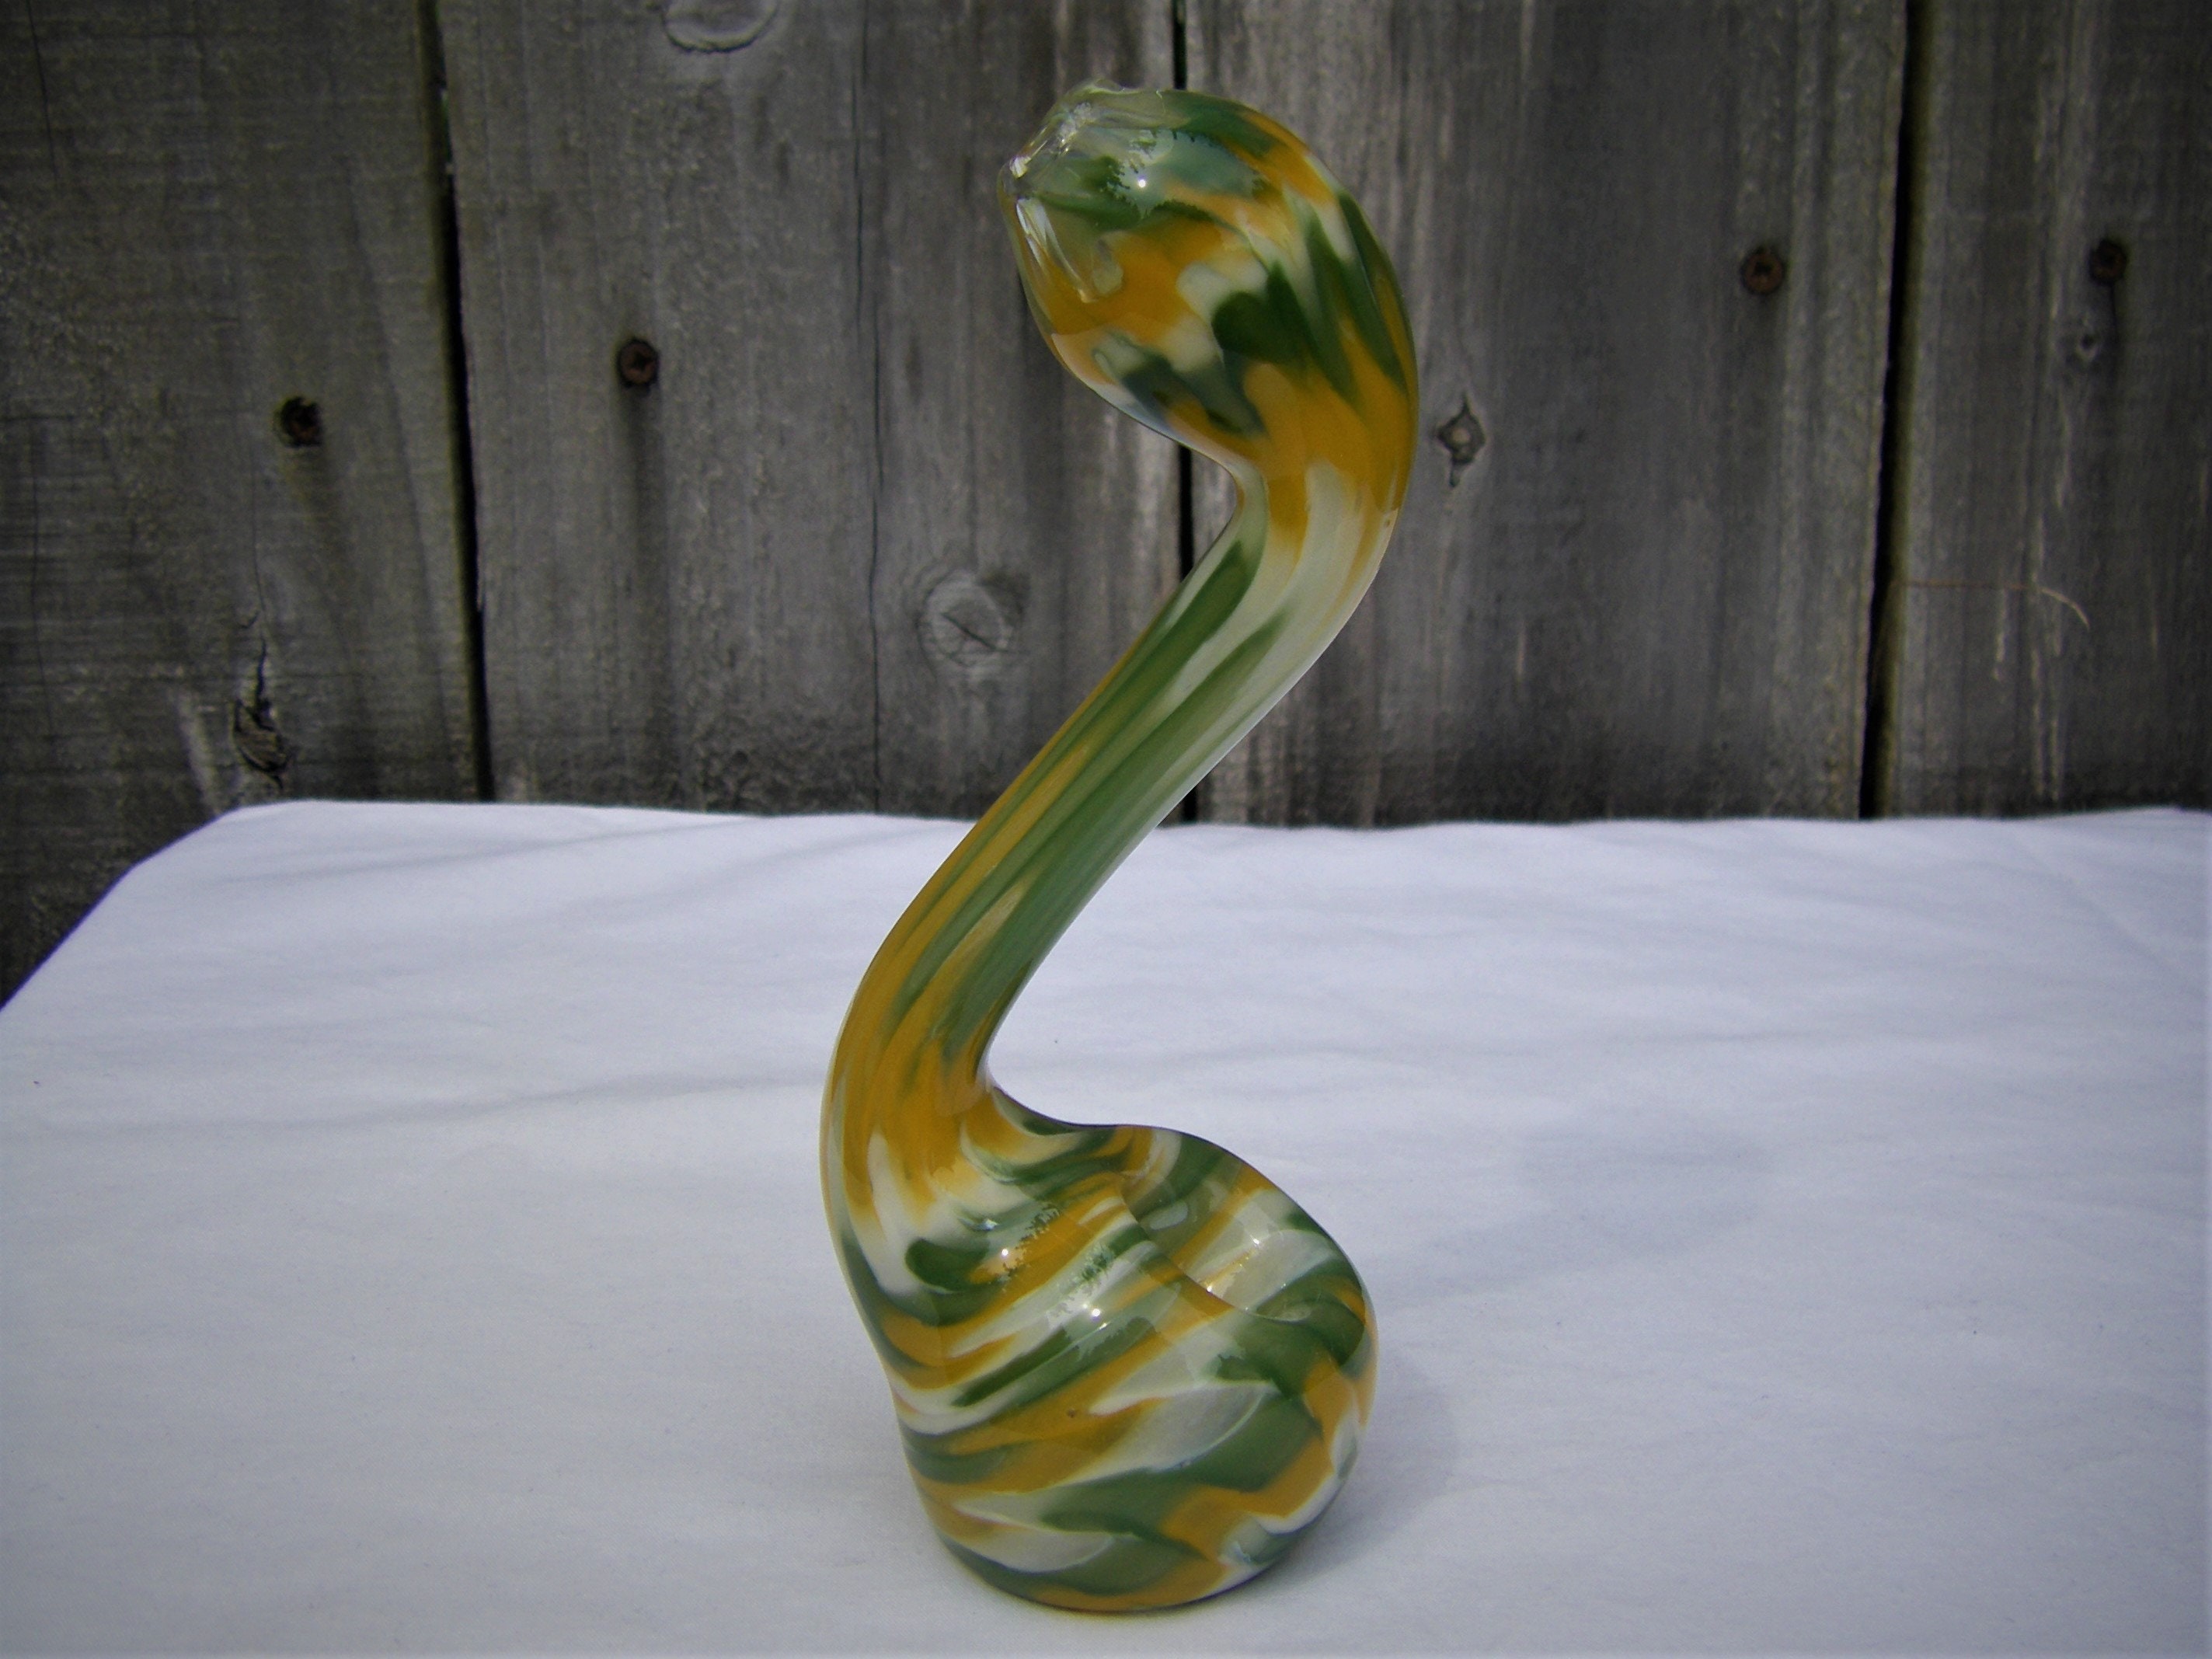 Rainbow Pipe 3 Glass Pipe Unique Chunky Colorful Smoking Bowl 